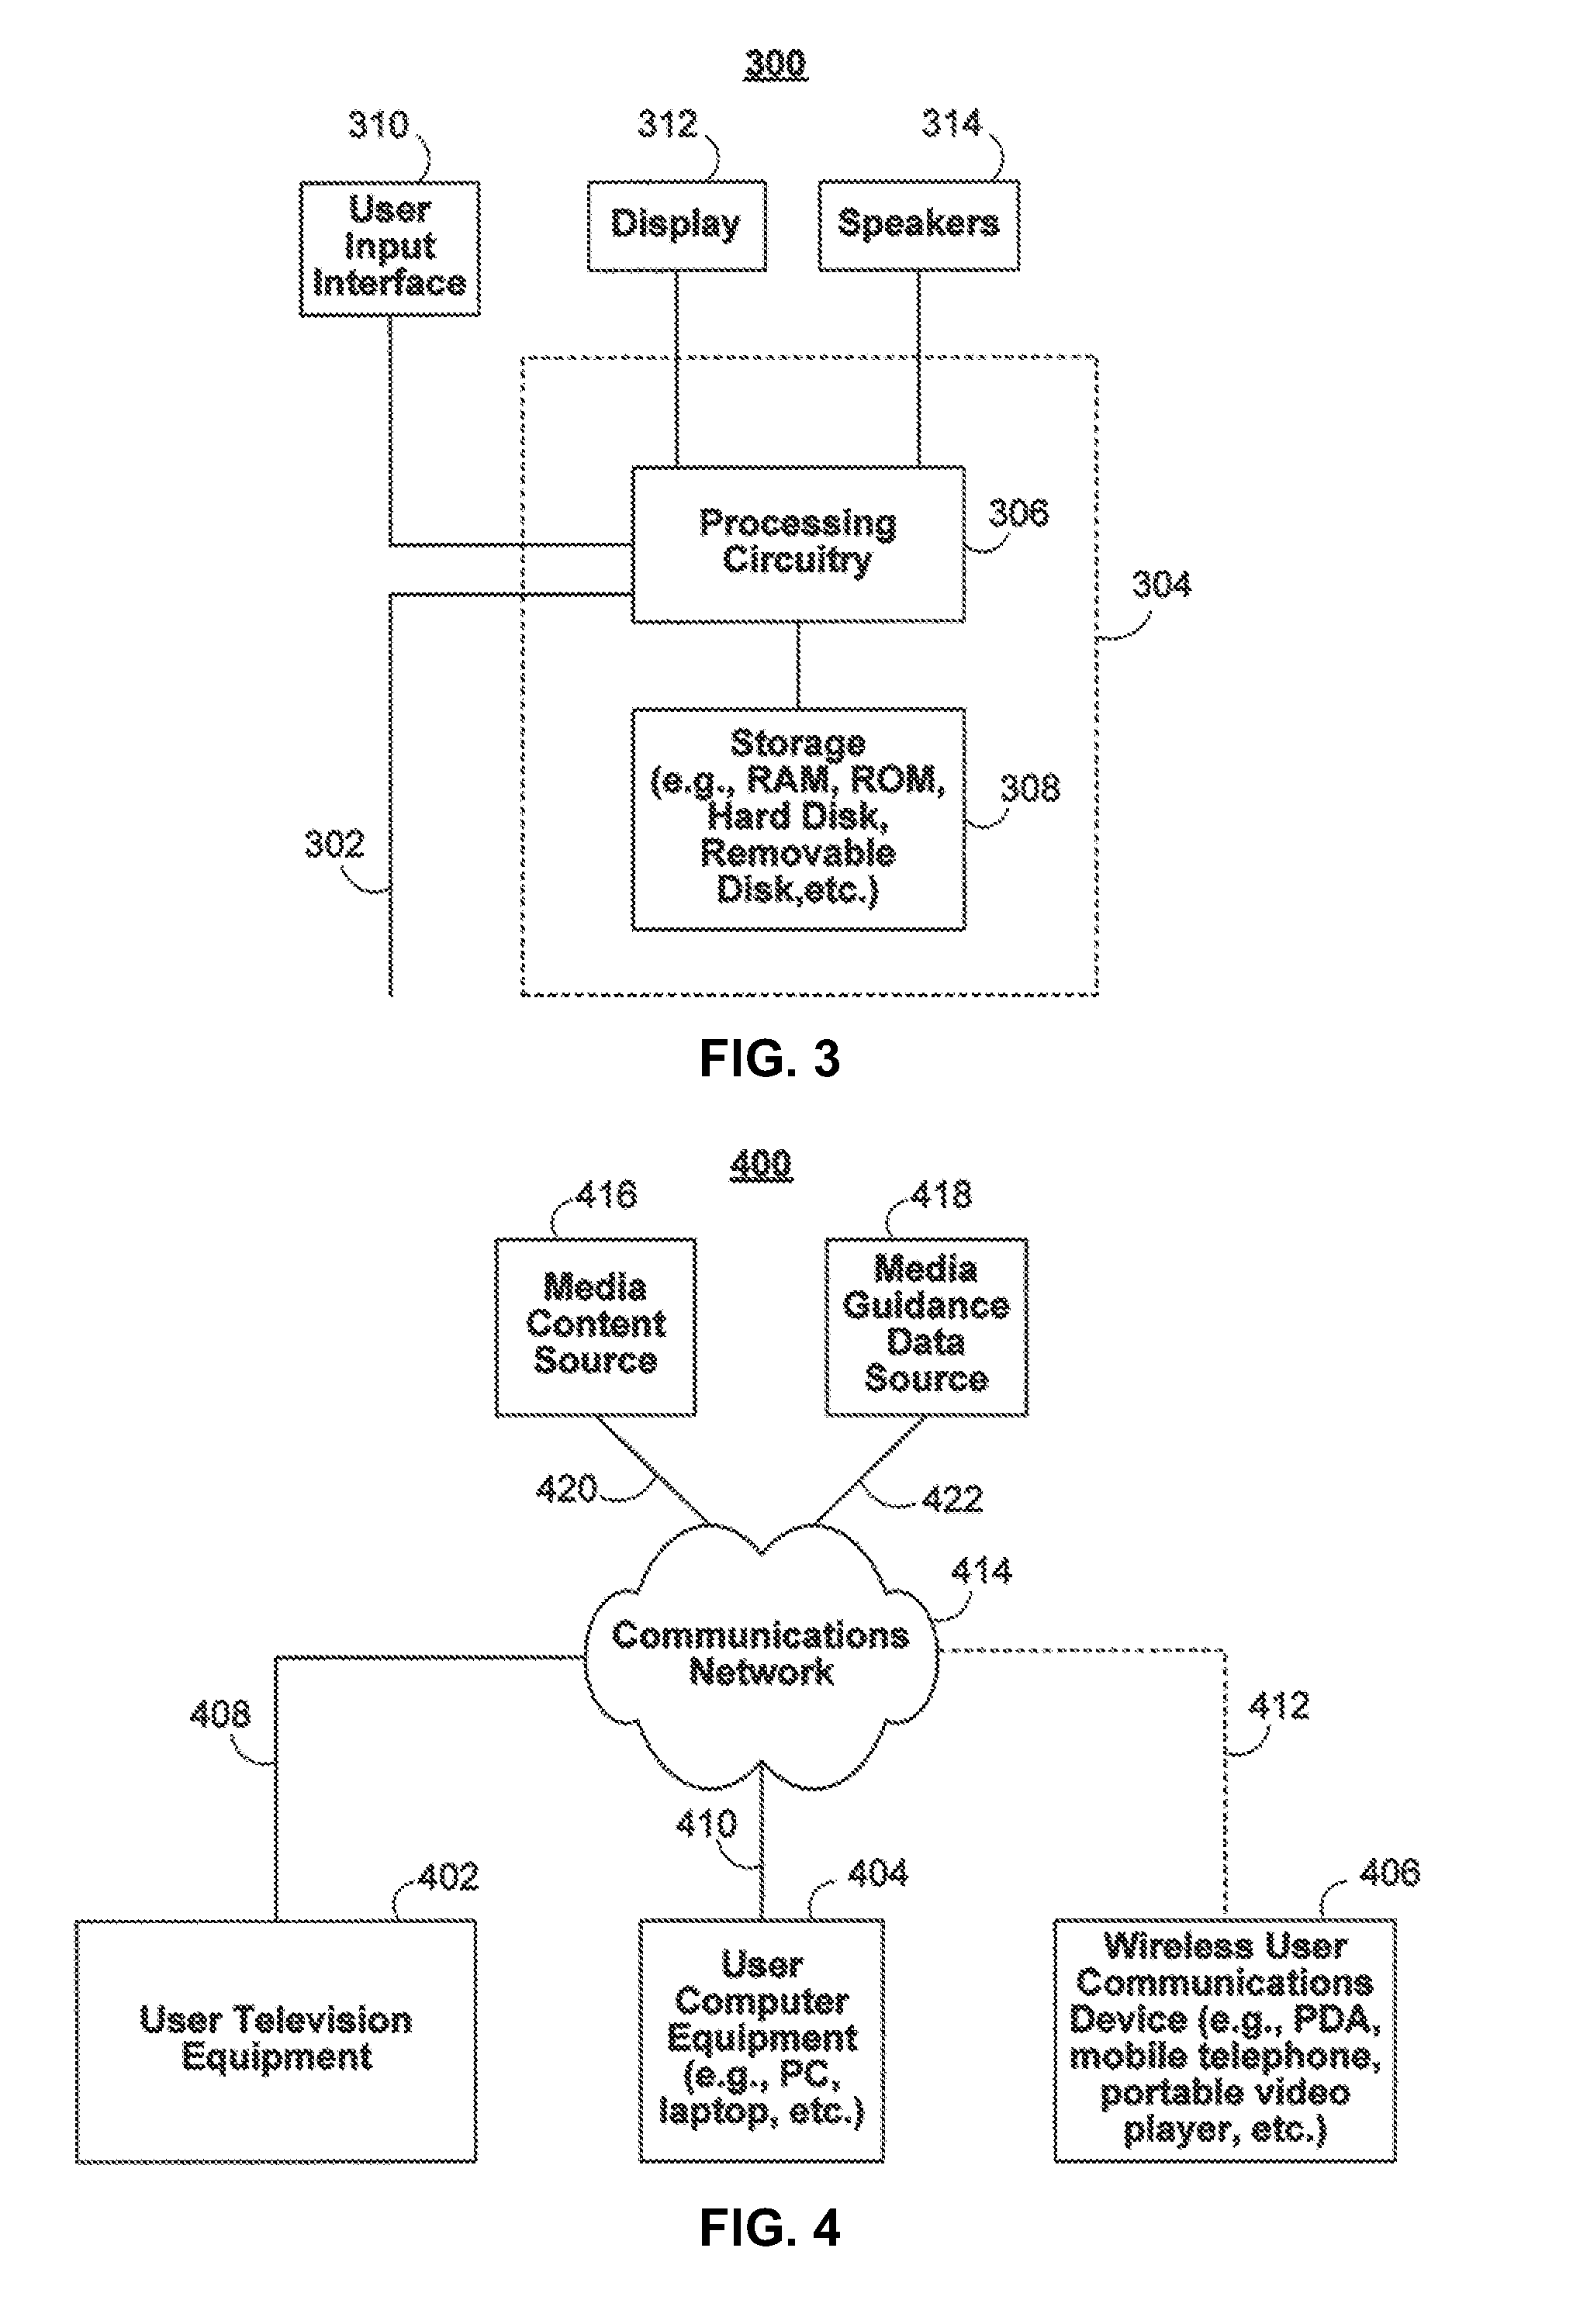 Systems and methods for assigning roles between user devices